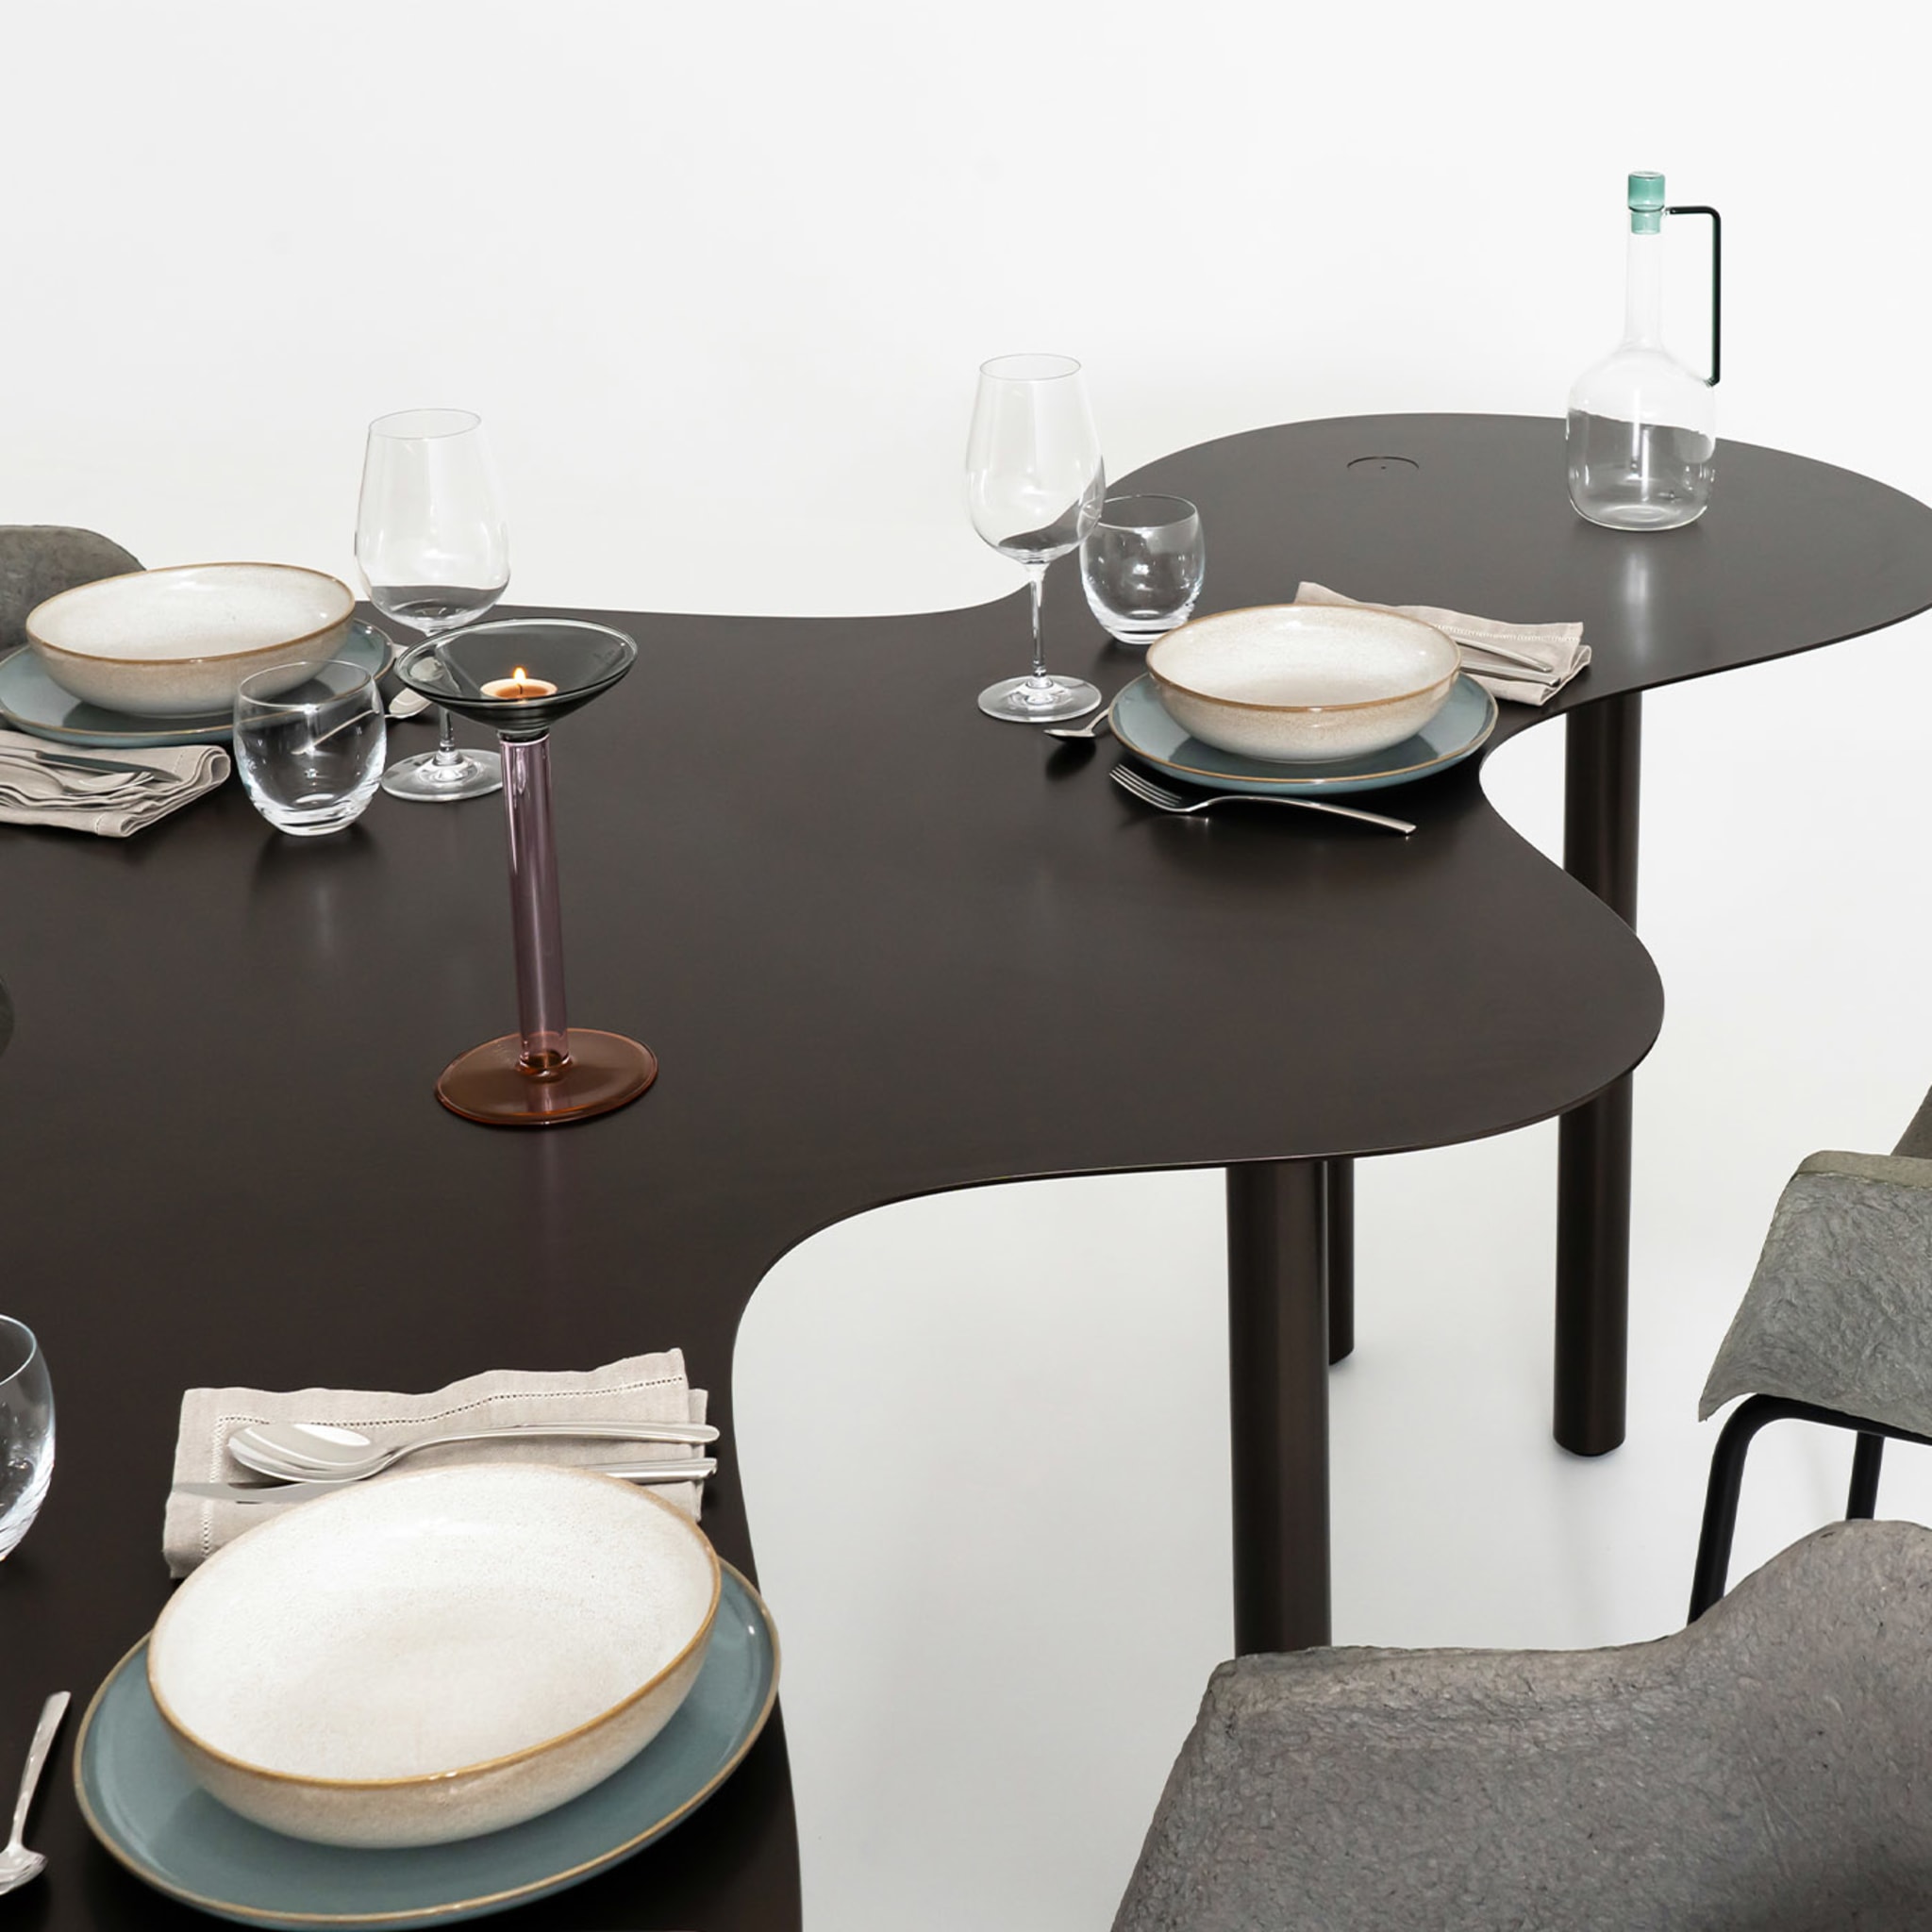 Nuvola 01 Dining Table by Mario Cucinella - Alternative view 4